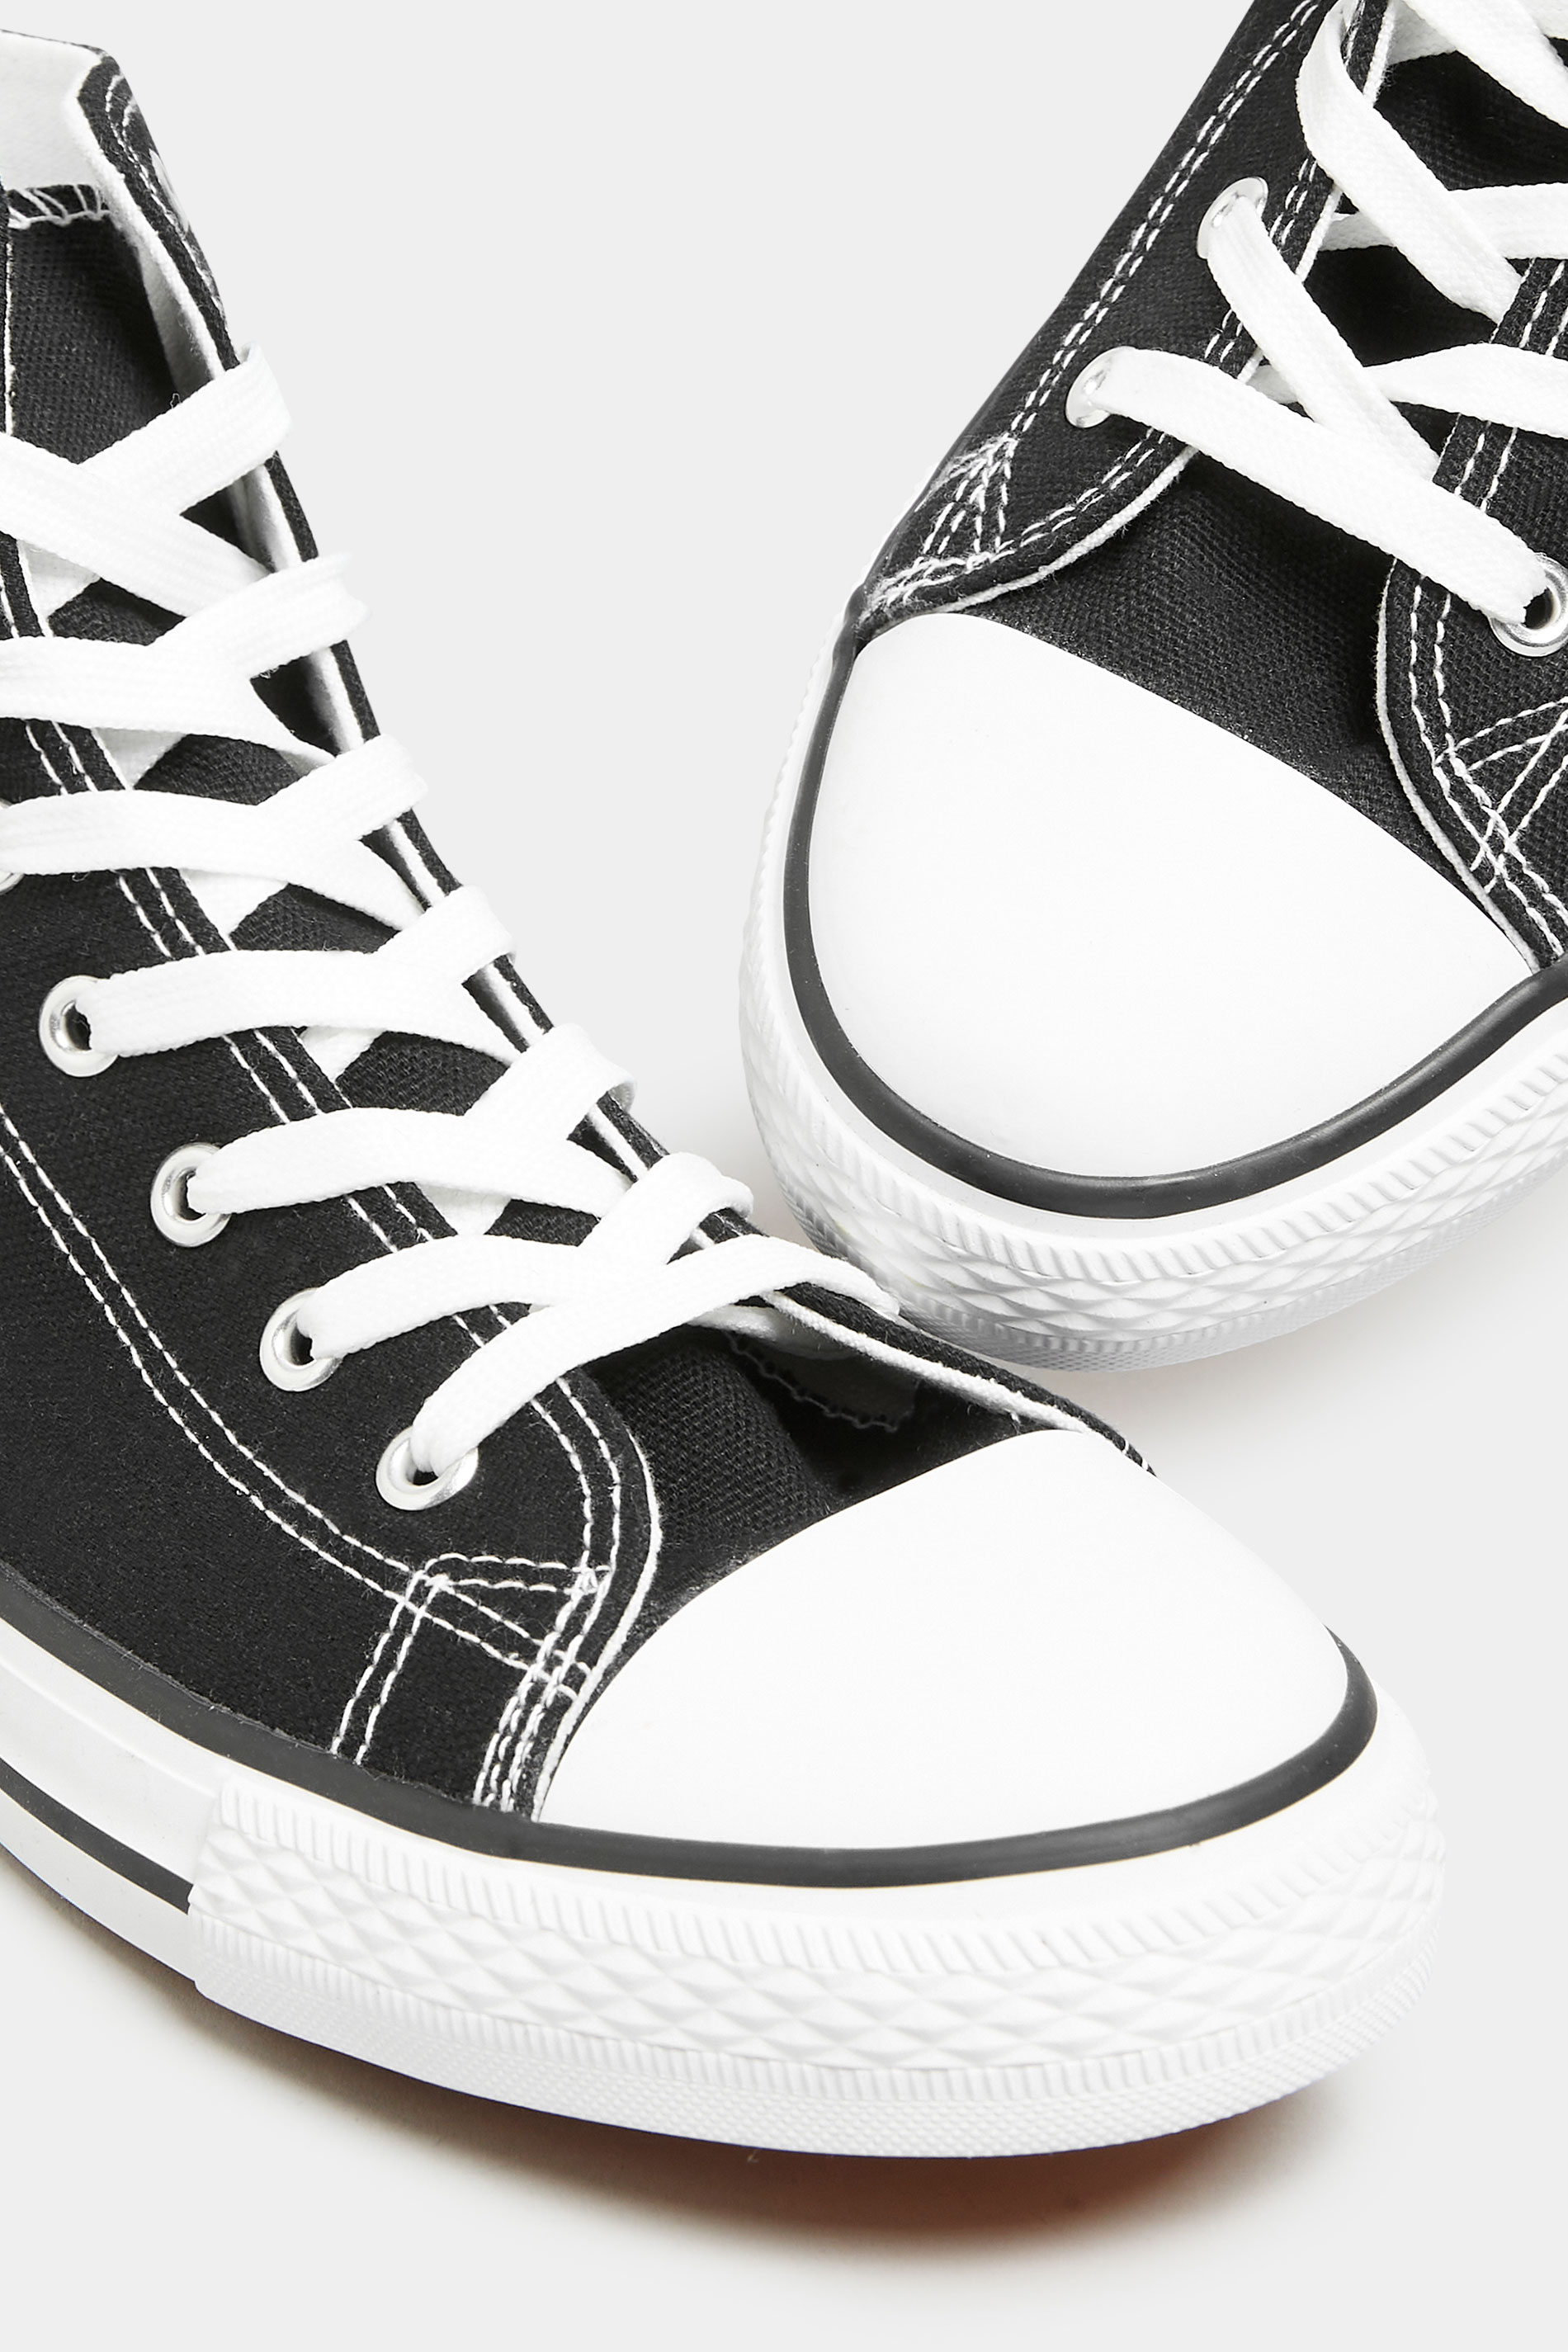 LTS Black Canvas High Top Trainers In Standard Fit | Long Tall Sally